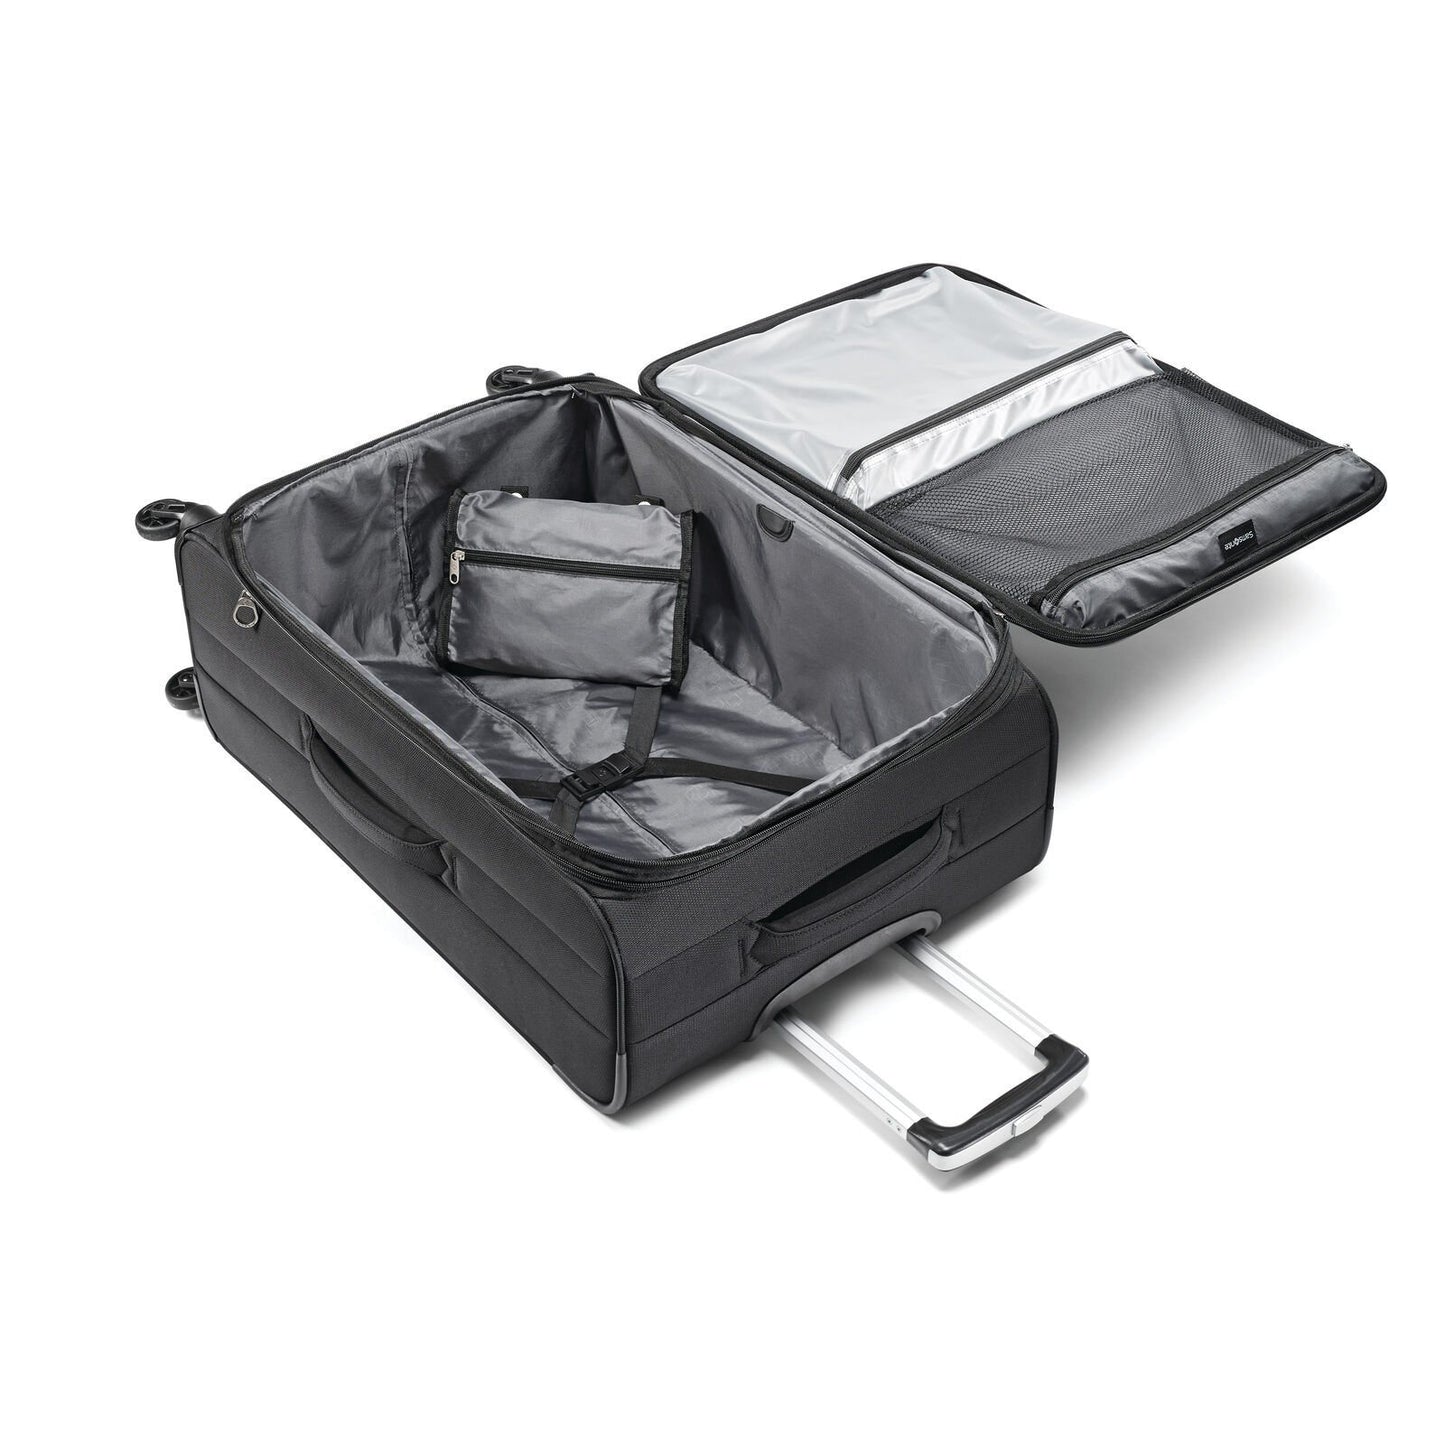 Luggage Samsonite Ascella I Carry-On Spinner